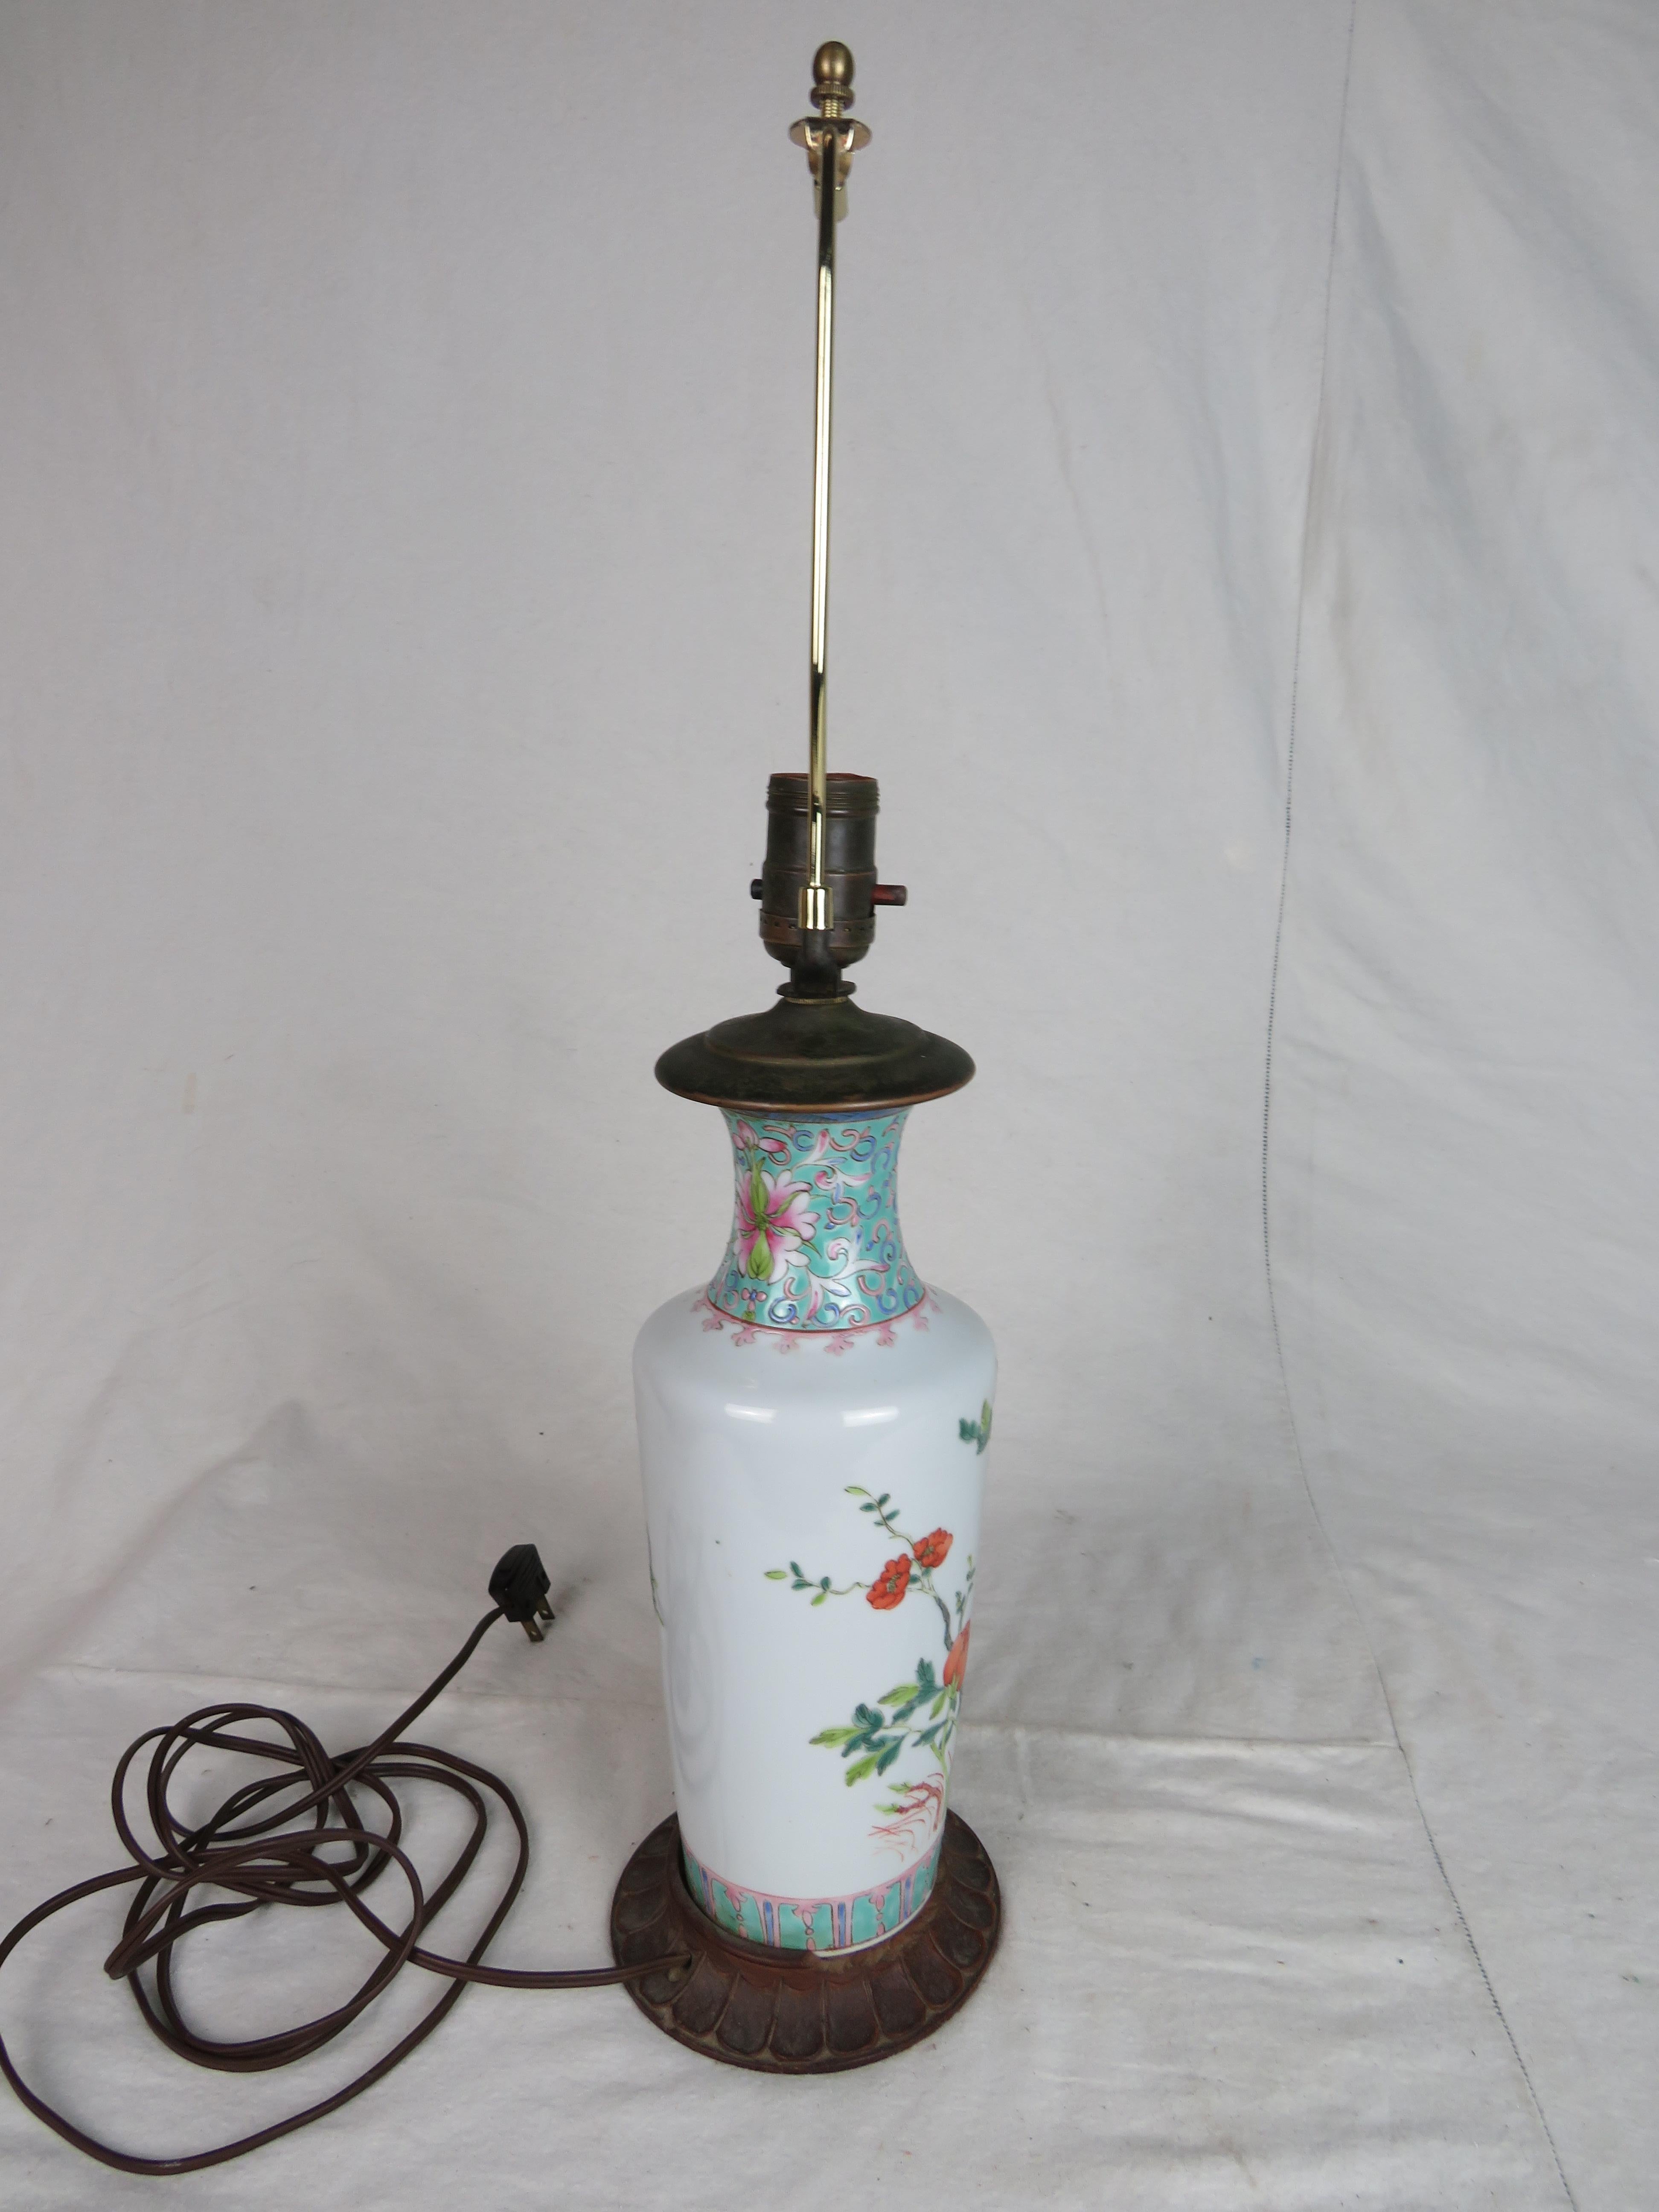 Beautiful 19th century white ceramic vasiform table lamp with detailed flowers and bird motif. Supported by a walnut wood base and copper neck. This piece fits cozily in any home.
   